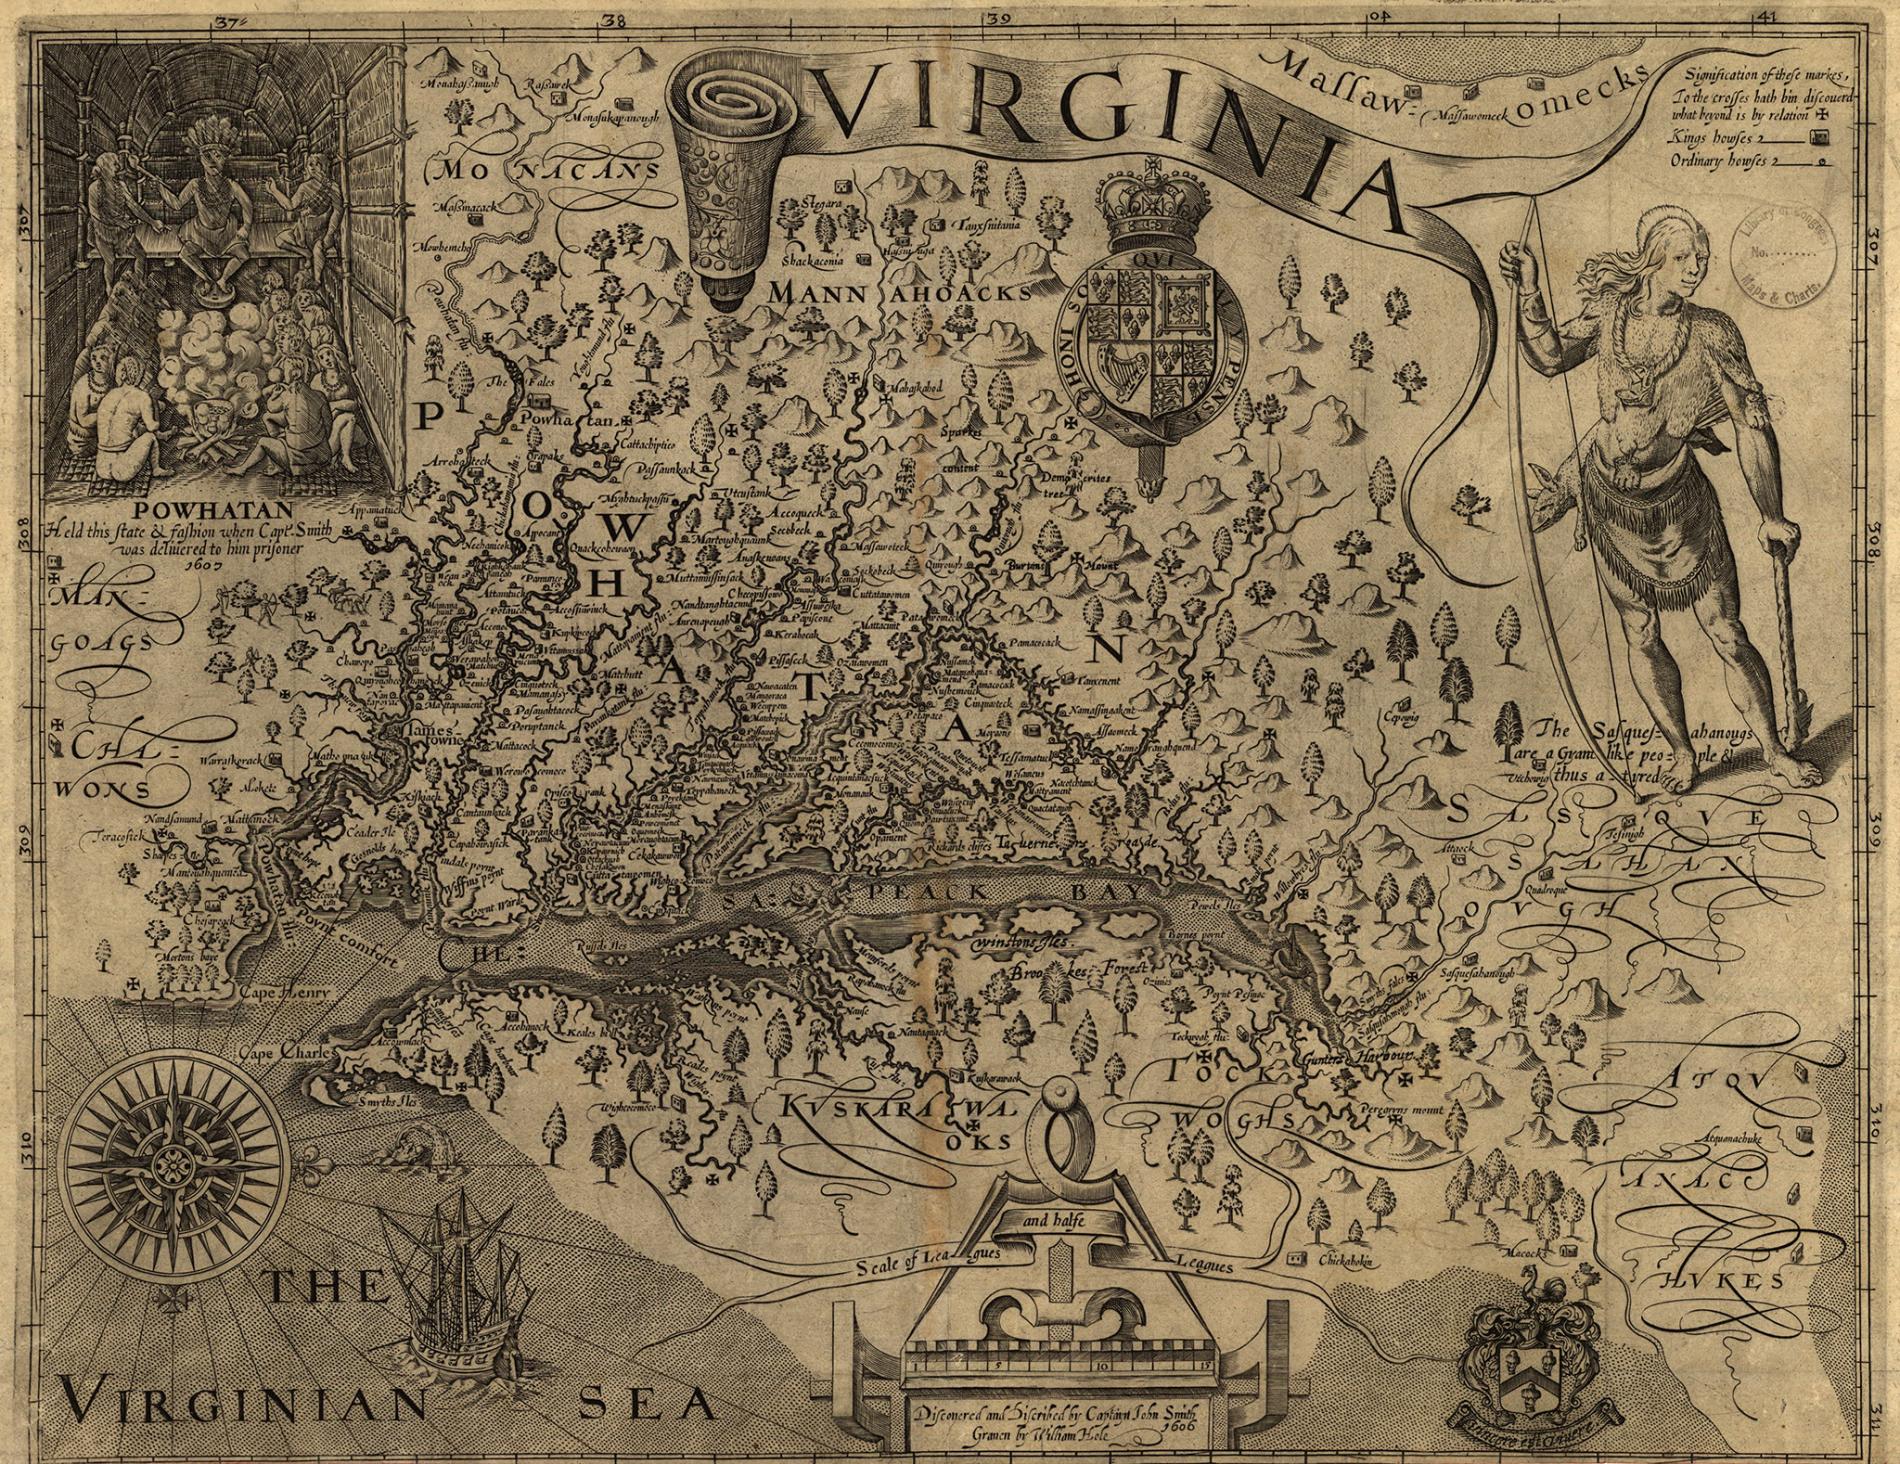 Image of an old map of Virginia